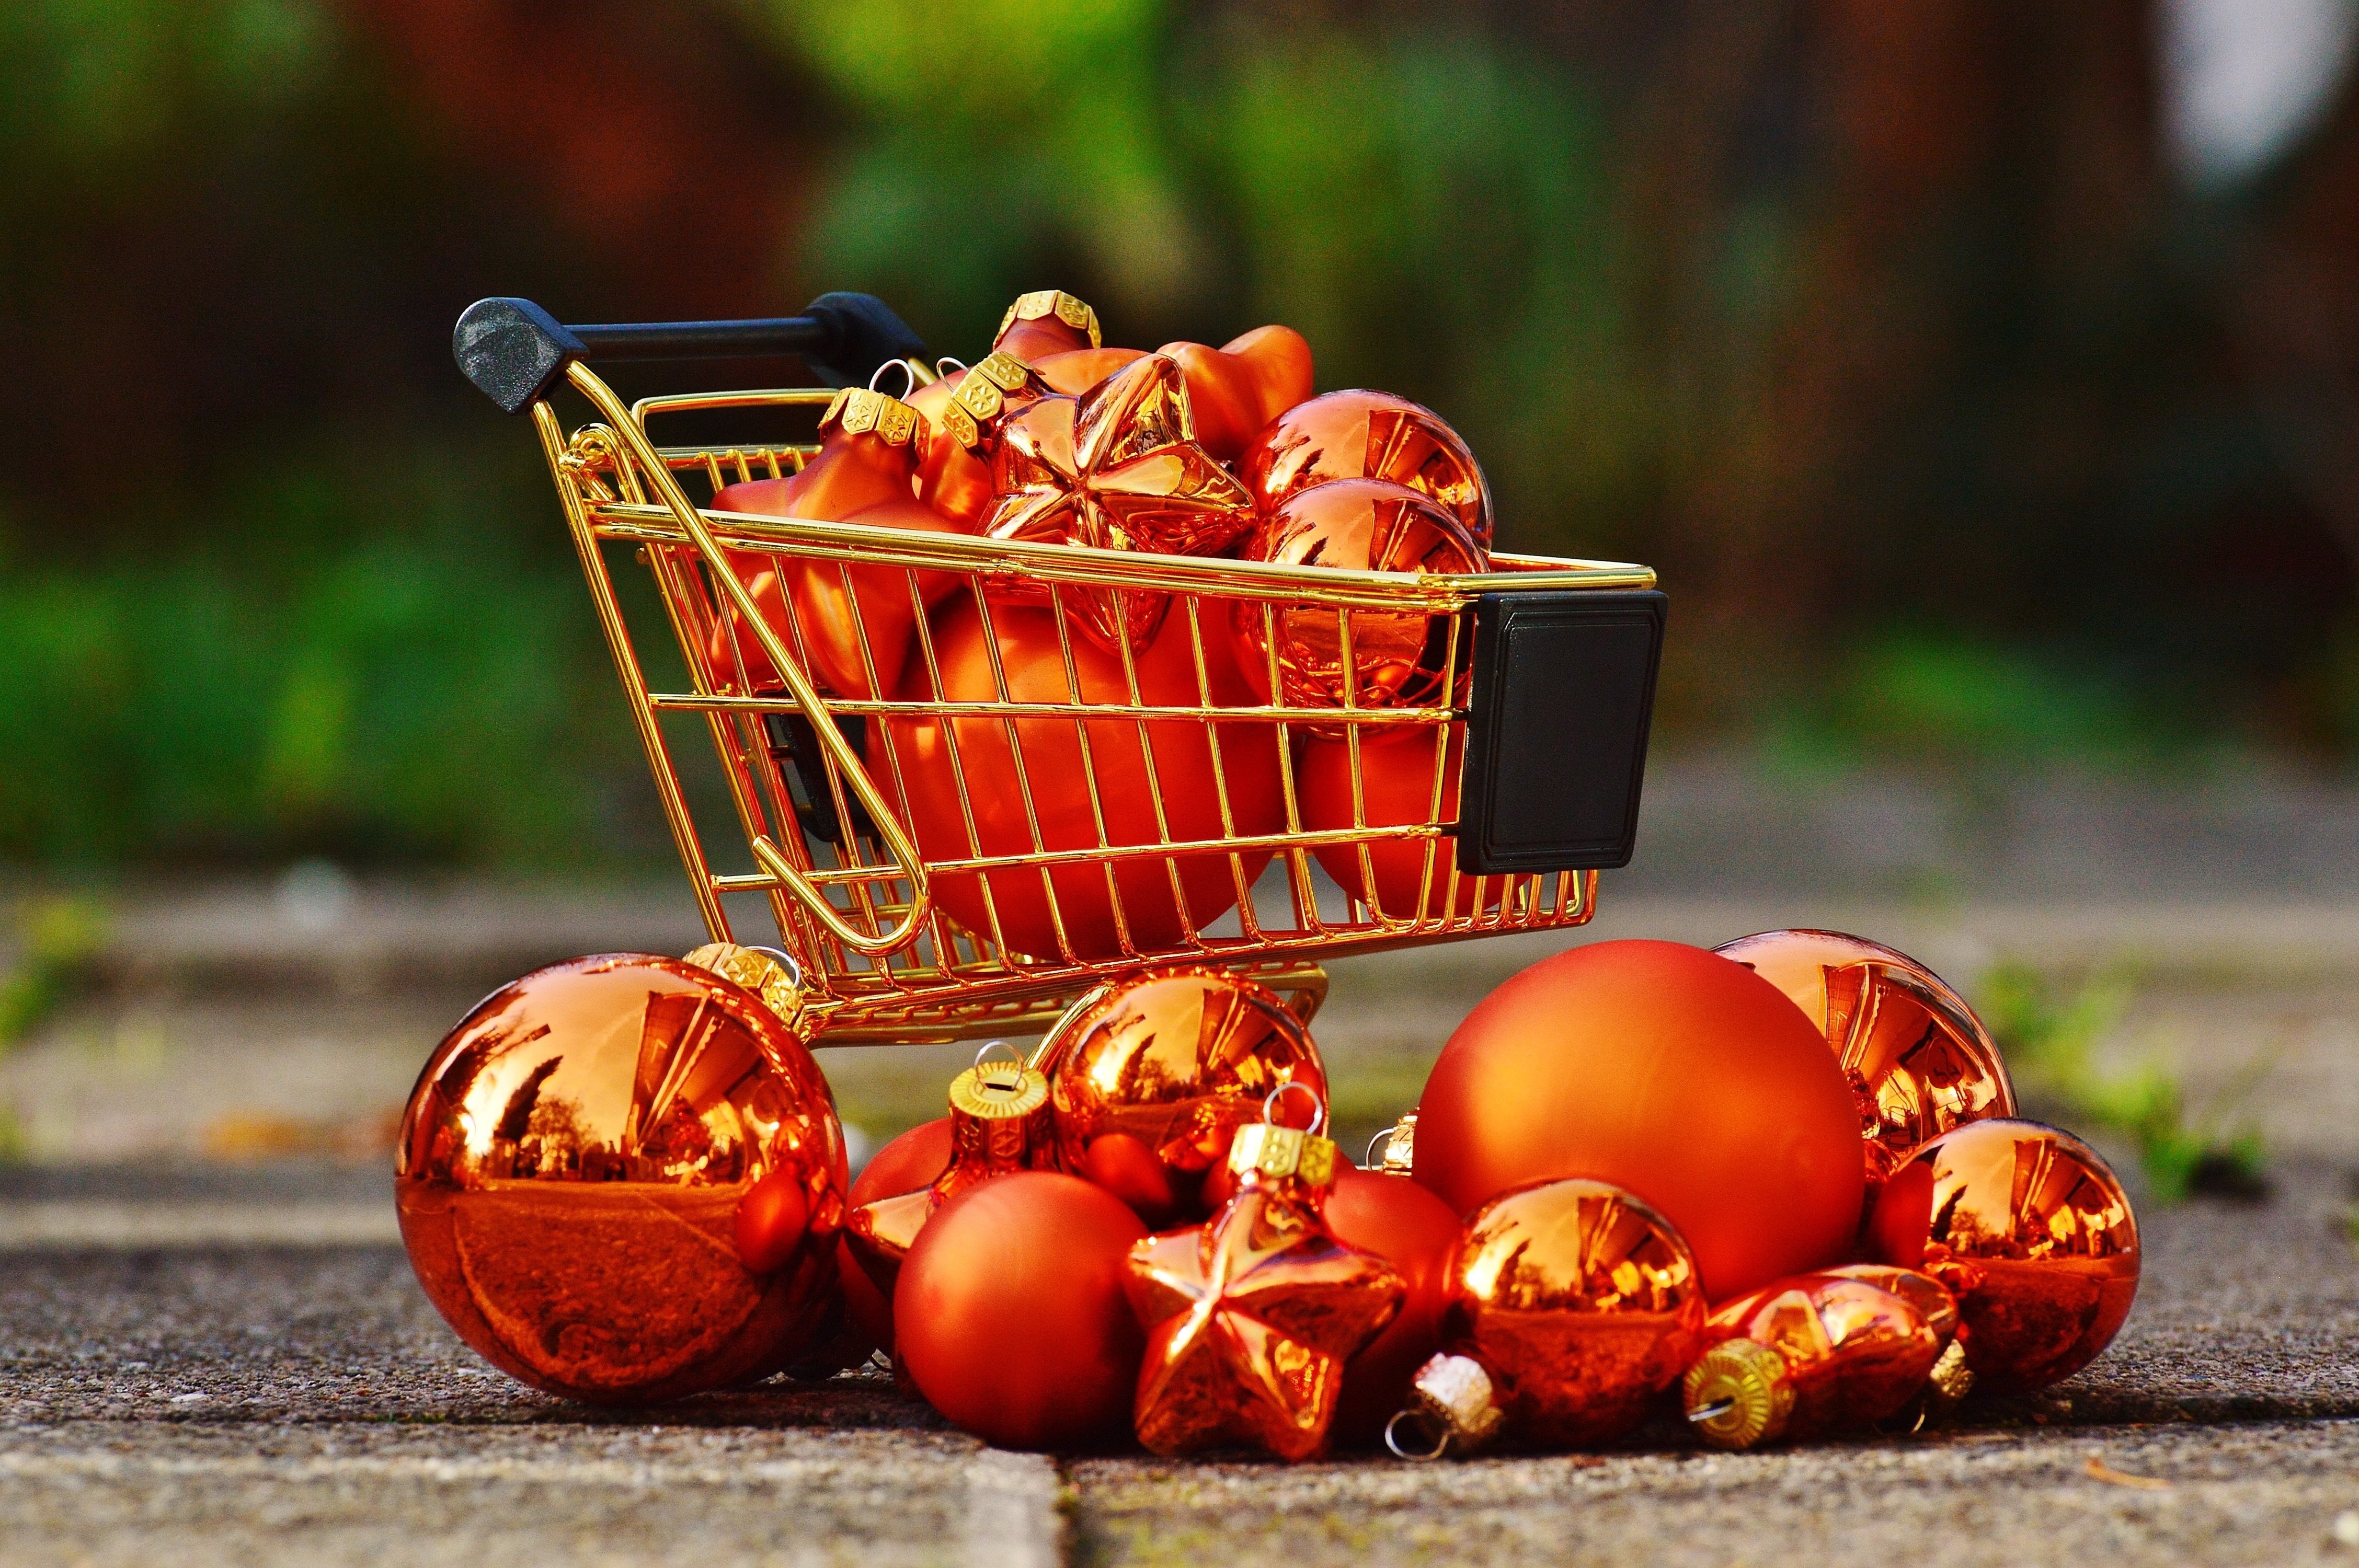 2560x1440 wallpaper Shopping Cart, Christmas Shopping, food and drink